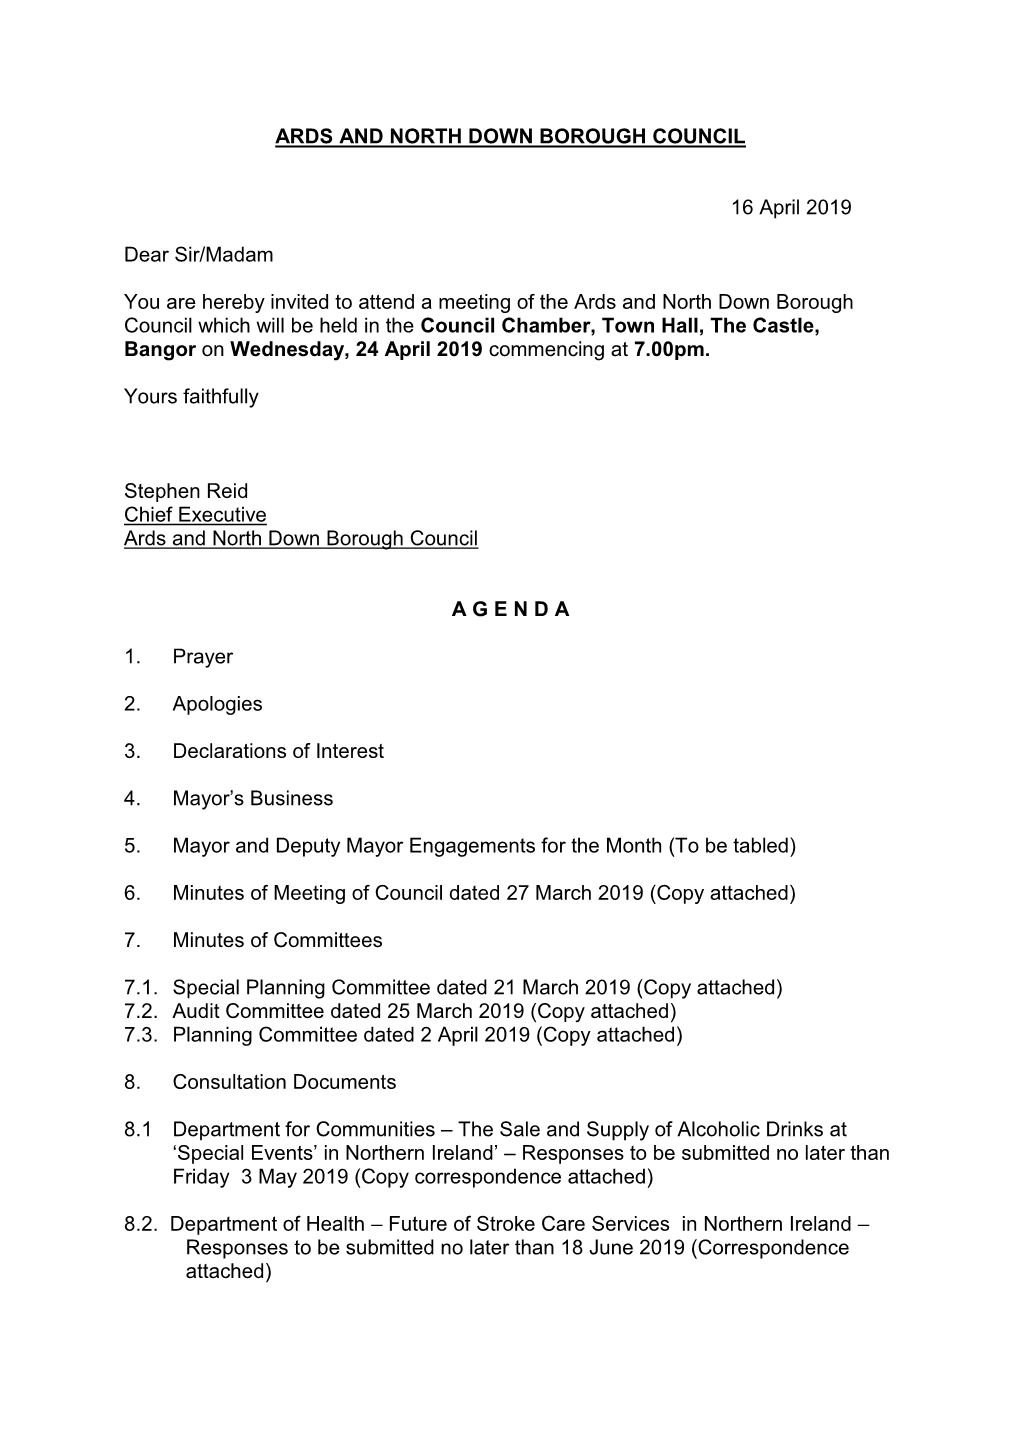 ARDS and NORTH DOWN BOROUGH COUNCIL 16 April